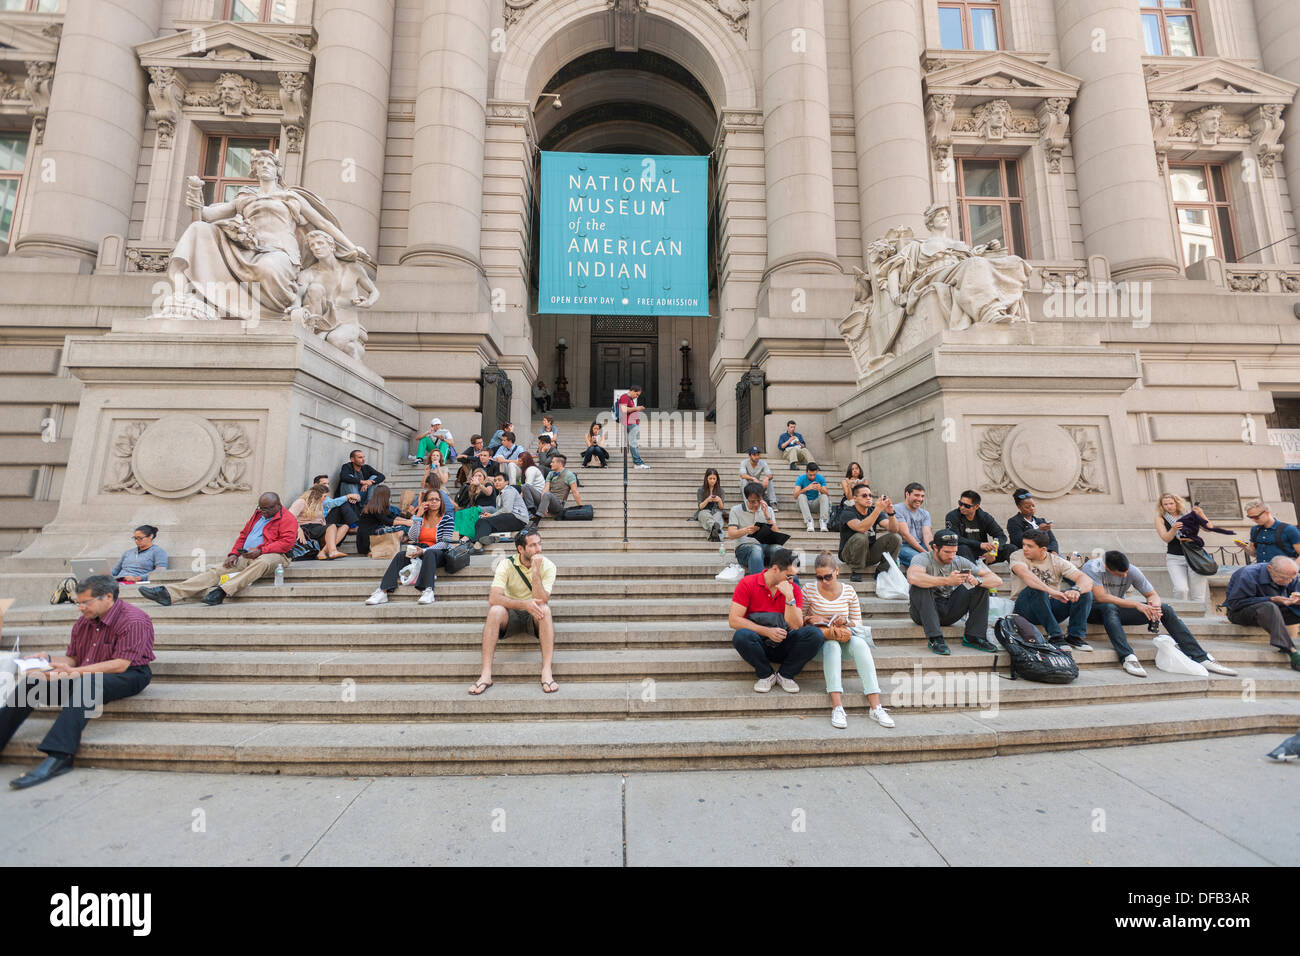 New York, USA. 1st October 2013. Tourists sit on the steps of the closed Smithsonian National Museum of the American Indian in Bowling Green in New York on Tuesday, October 1, 2013. A partial government shutdown took effect today because of a dispute between Democrats and Republicans in Congress over the Obamacare program. Approximately 800,000 federal workers have been furloughed and only essential services are up and running.  Credit:  Richard B. Levine/Alamy Live News Stock Photo